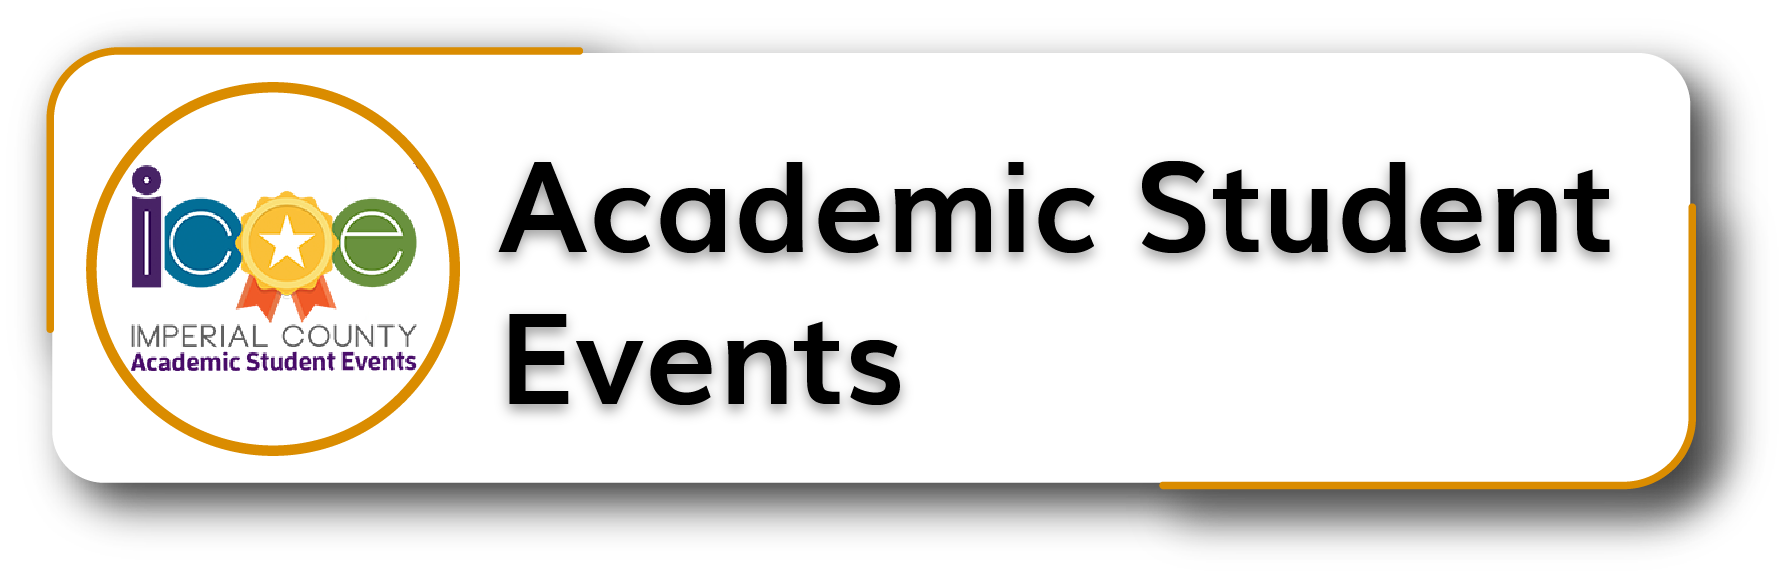 Academic Student Events Button